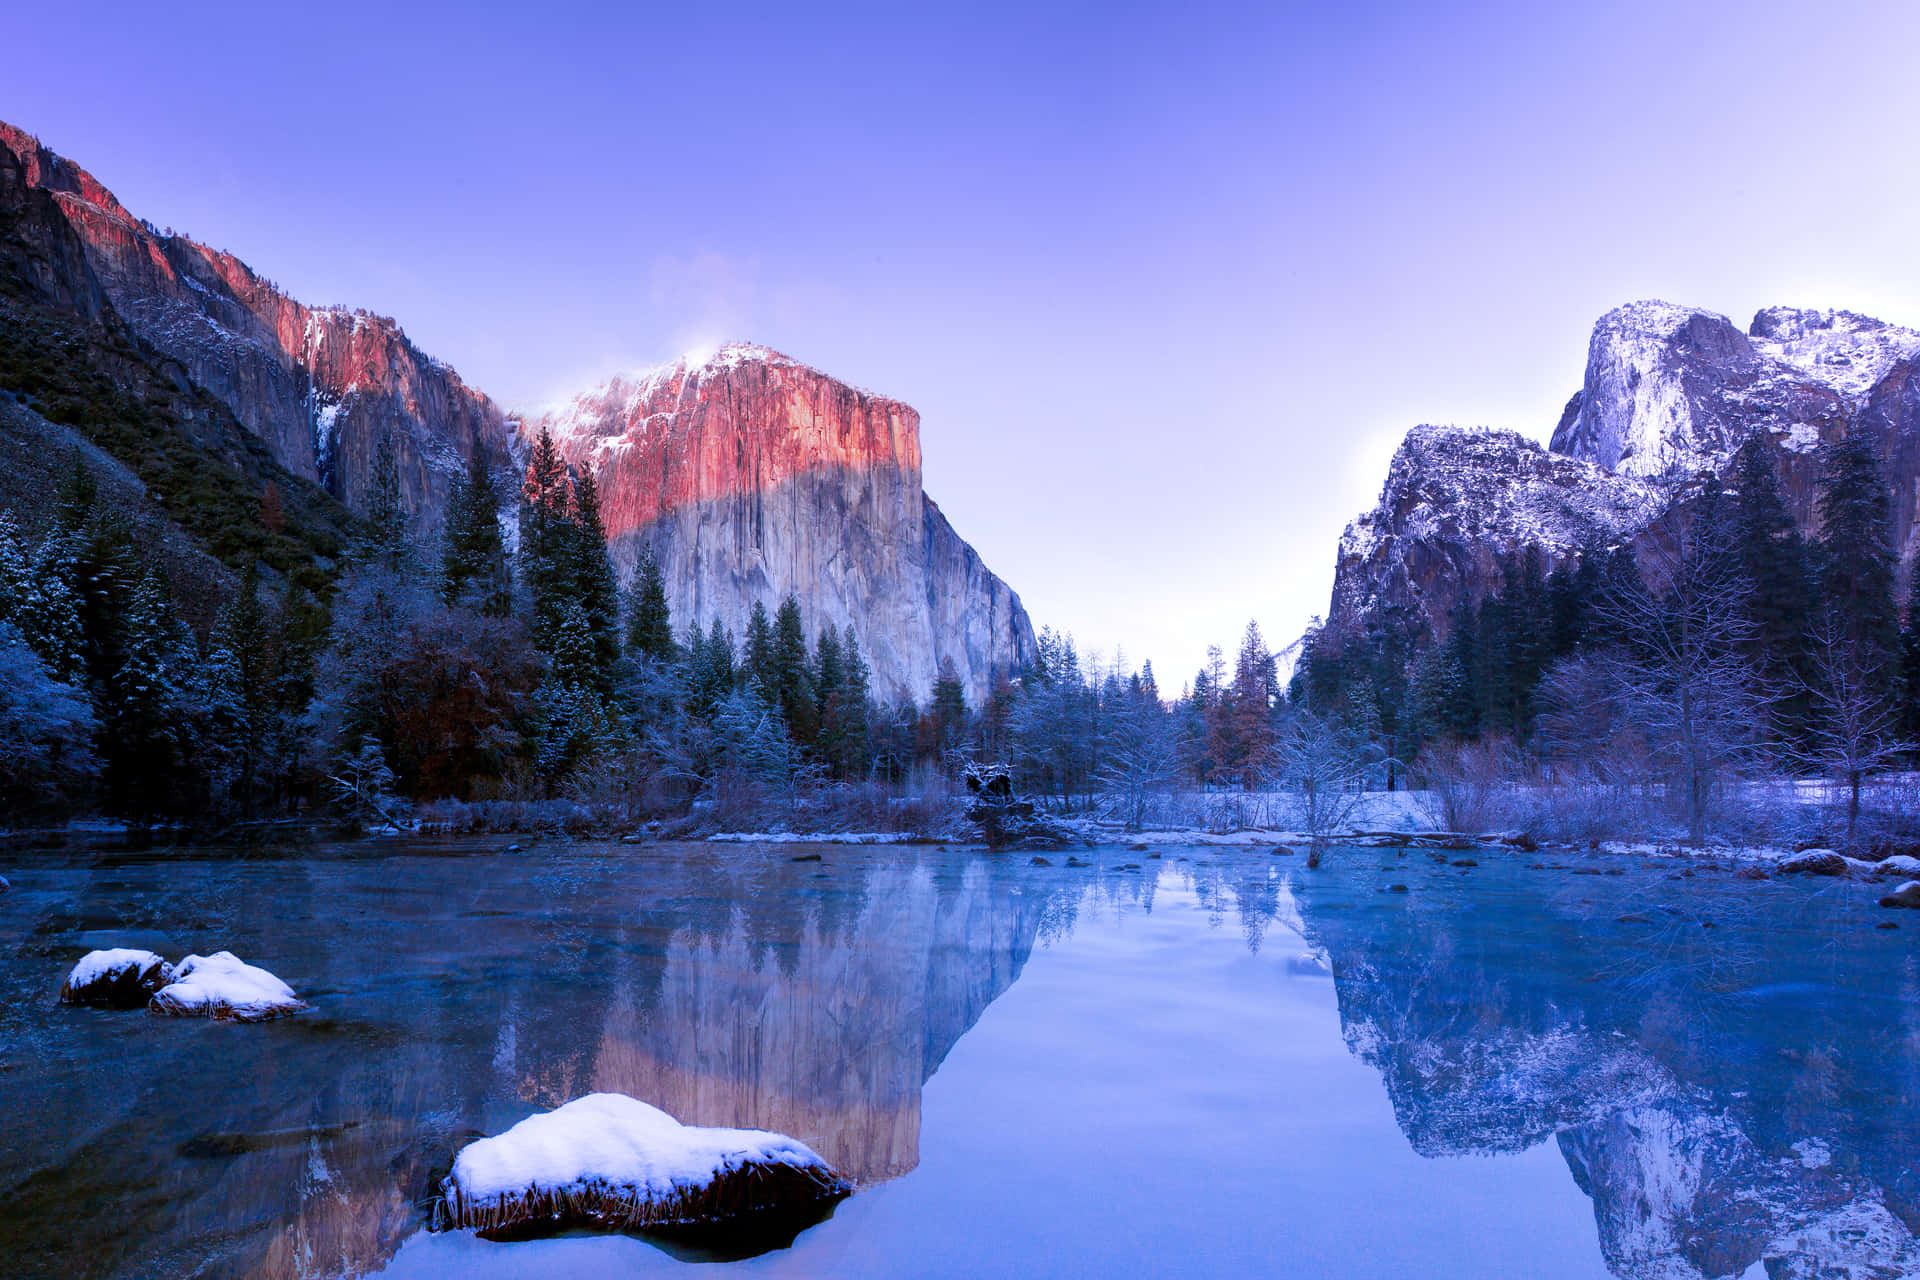 Soak in the peaceful beauty of a snow-capped mountain lake. Wallpaper